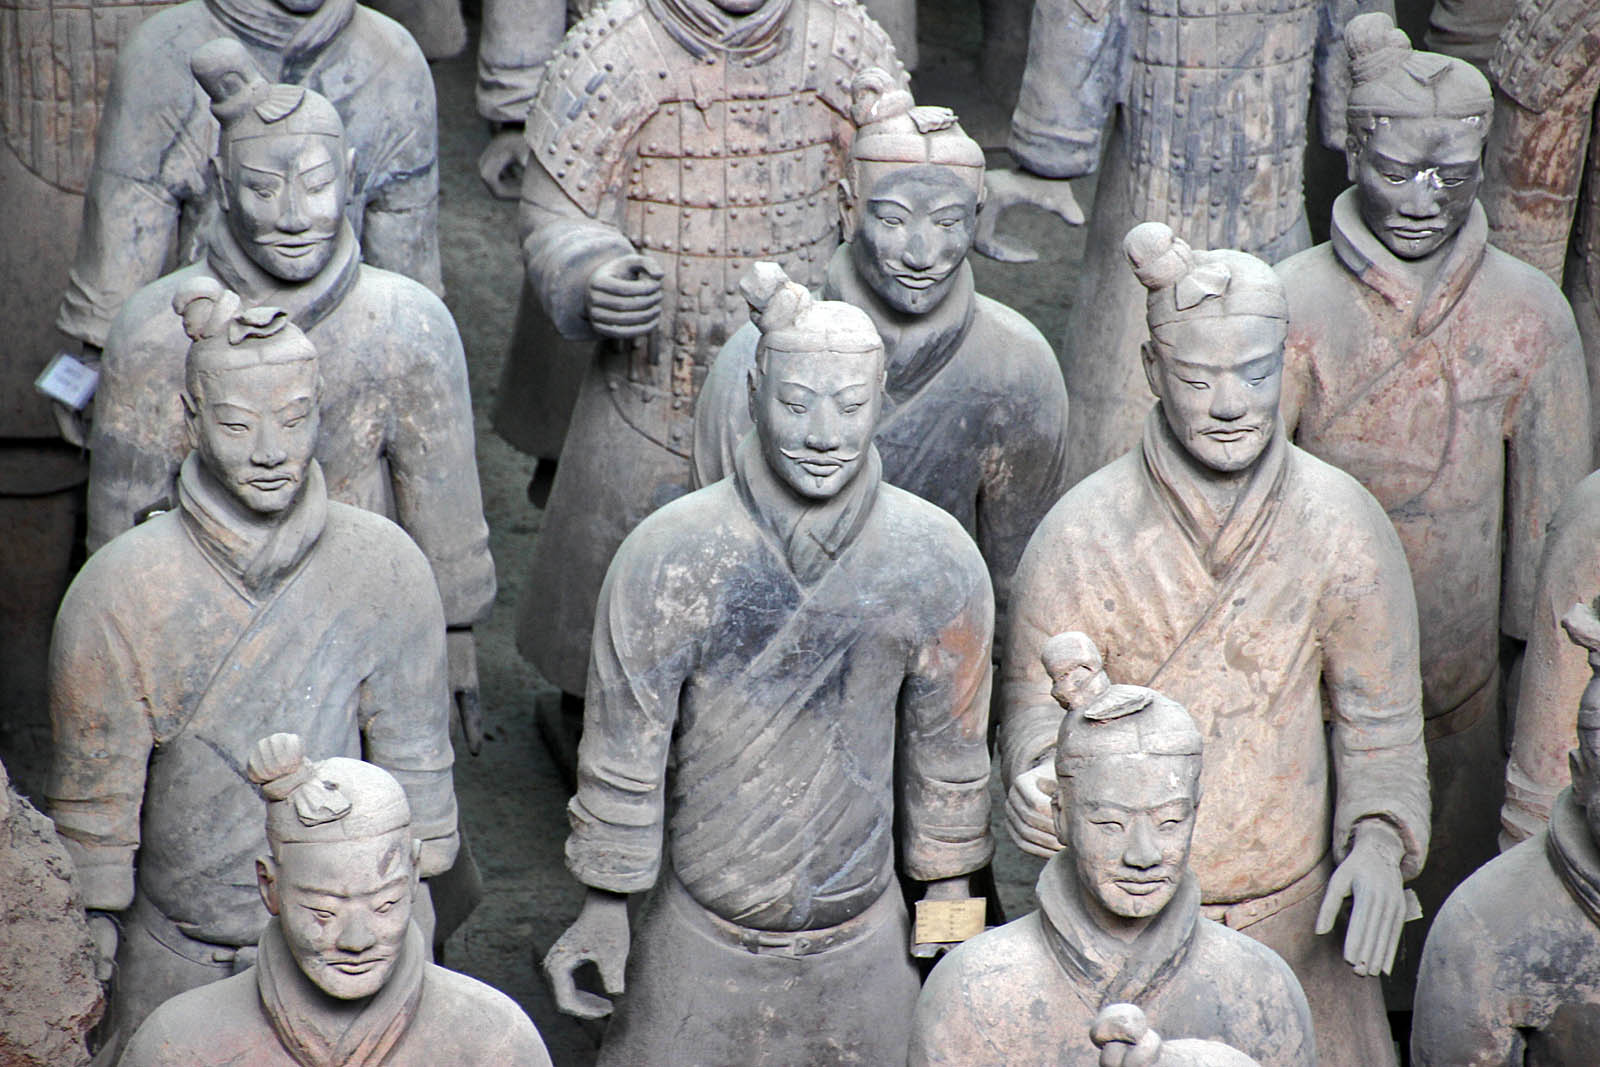 The famed terracotta soldiers at the mausoleum of Qin Shi Huangdi, discovered by local farmers in 1972. Remarkably, each soldier appears to have been a portrait of an individual soldier in Qin's army.